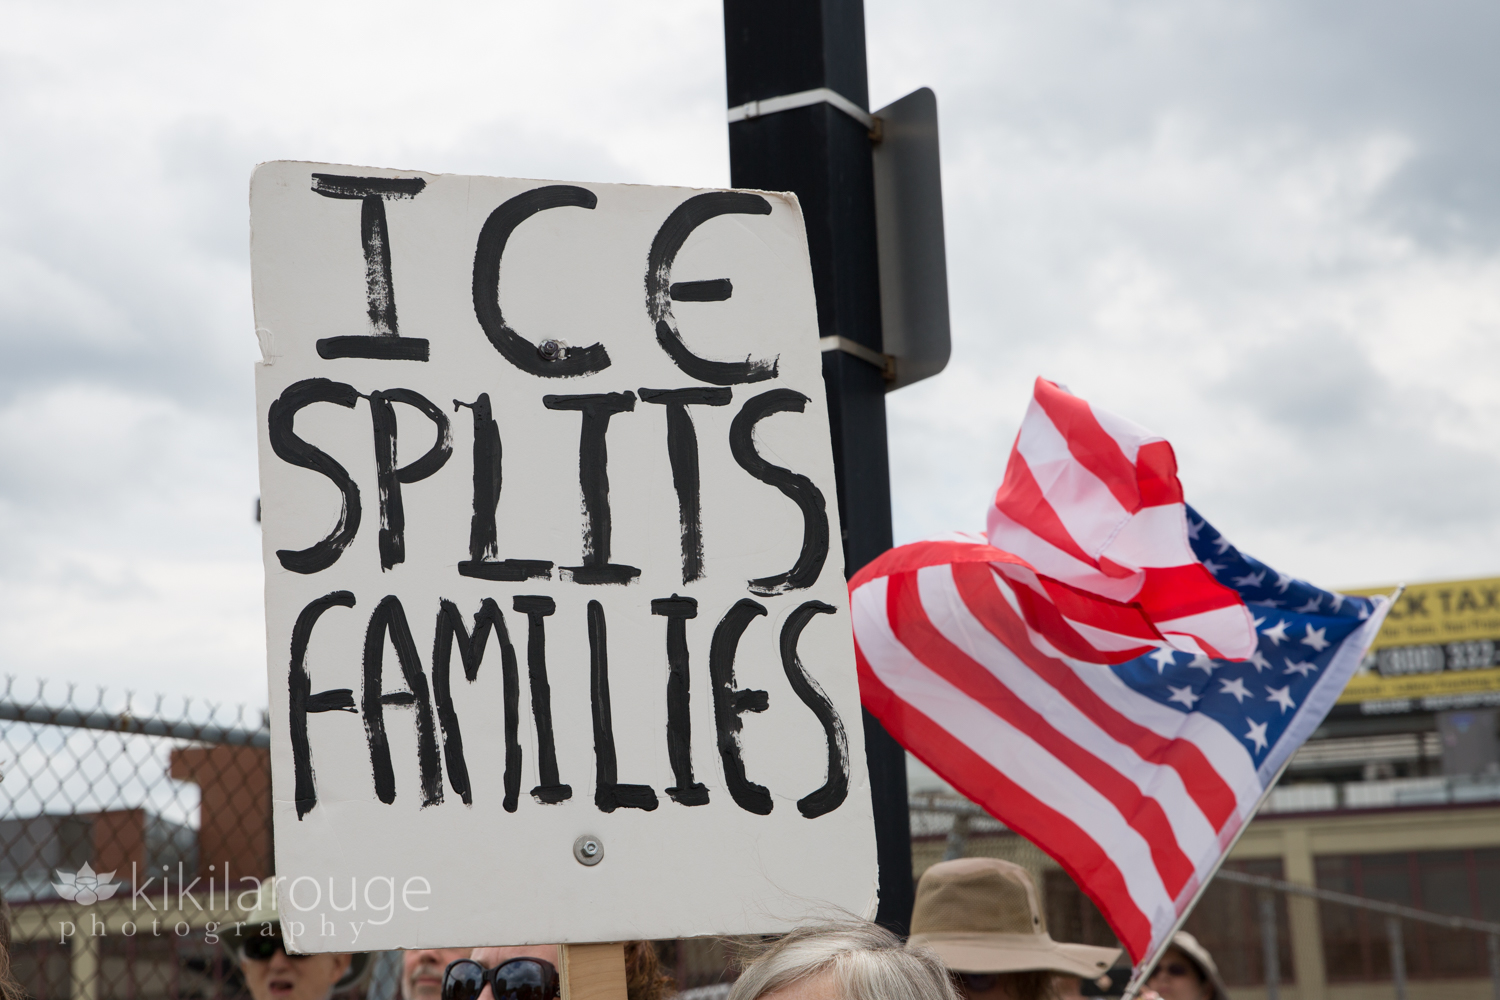 Protest Sign ICE Splits Families with American flag waving